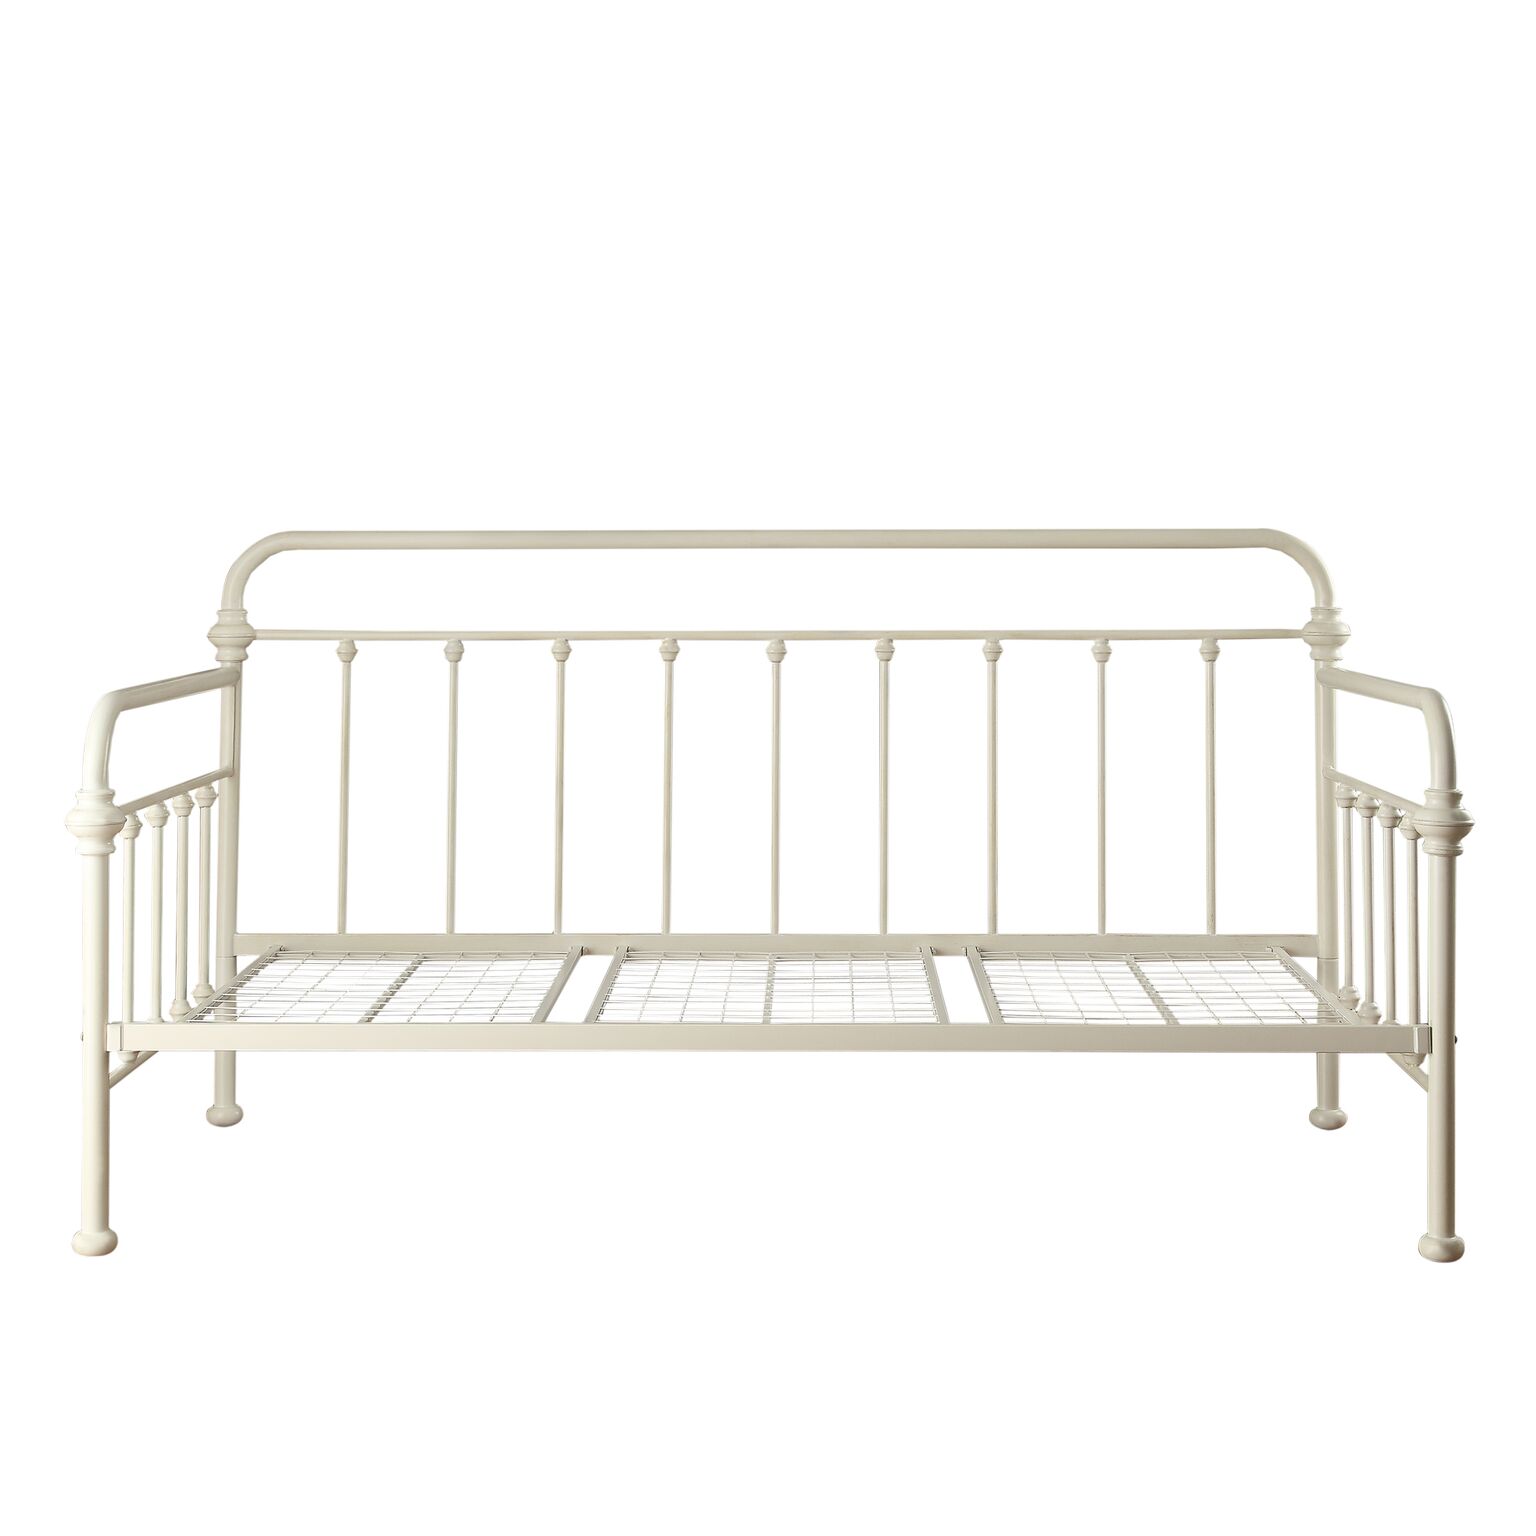 Weston Home Nottingham Metal Twin Daybed, Antique White - image 3 of 7